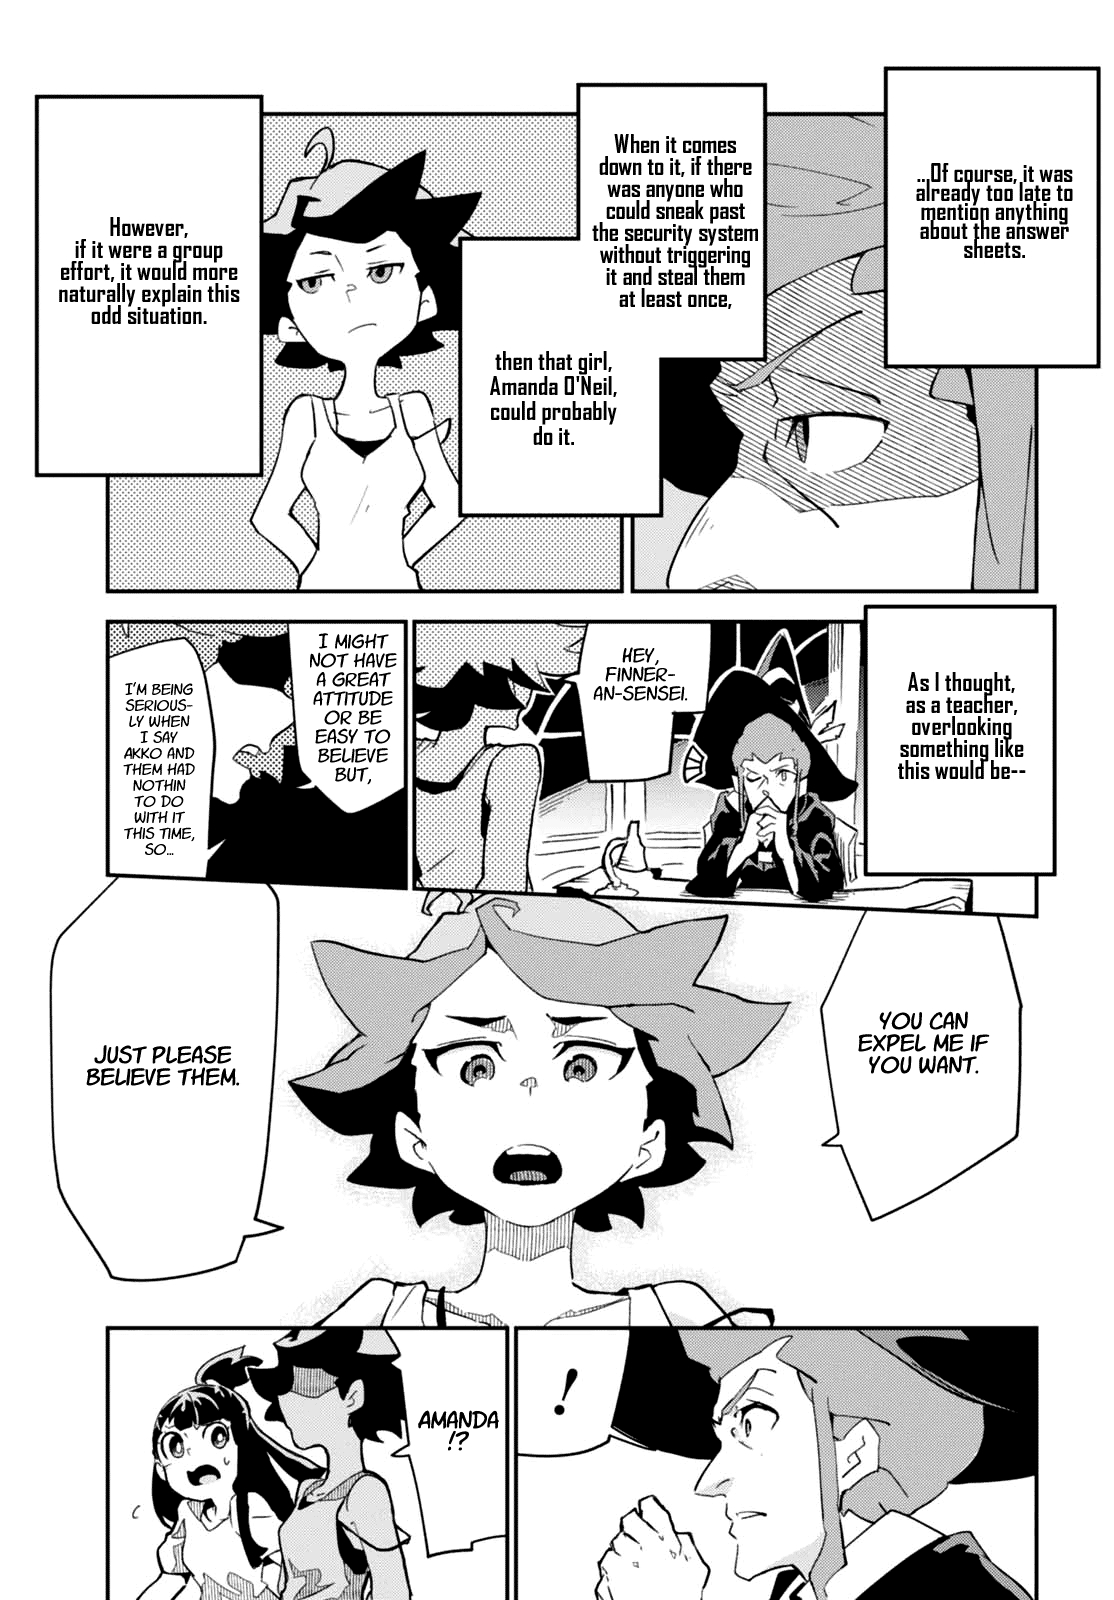 Little Witch Academia Vol. 2 Ch. 11